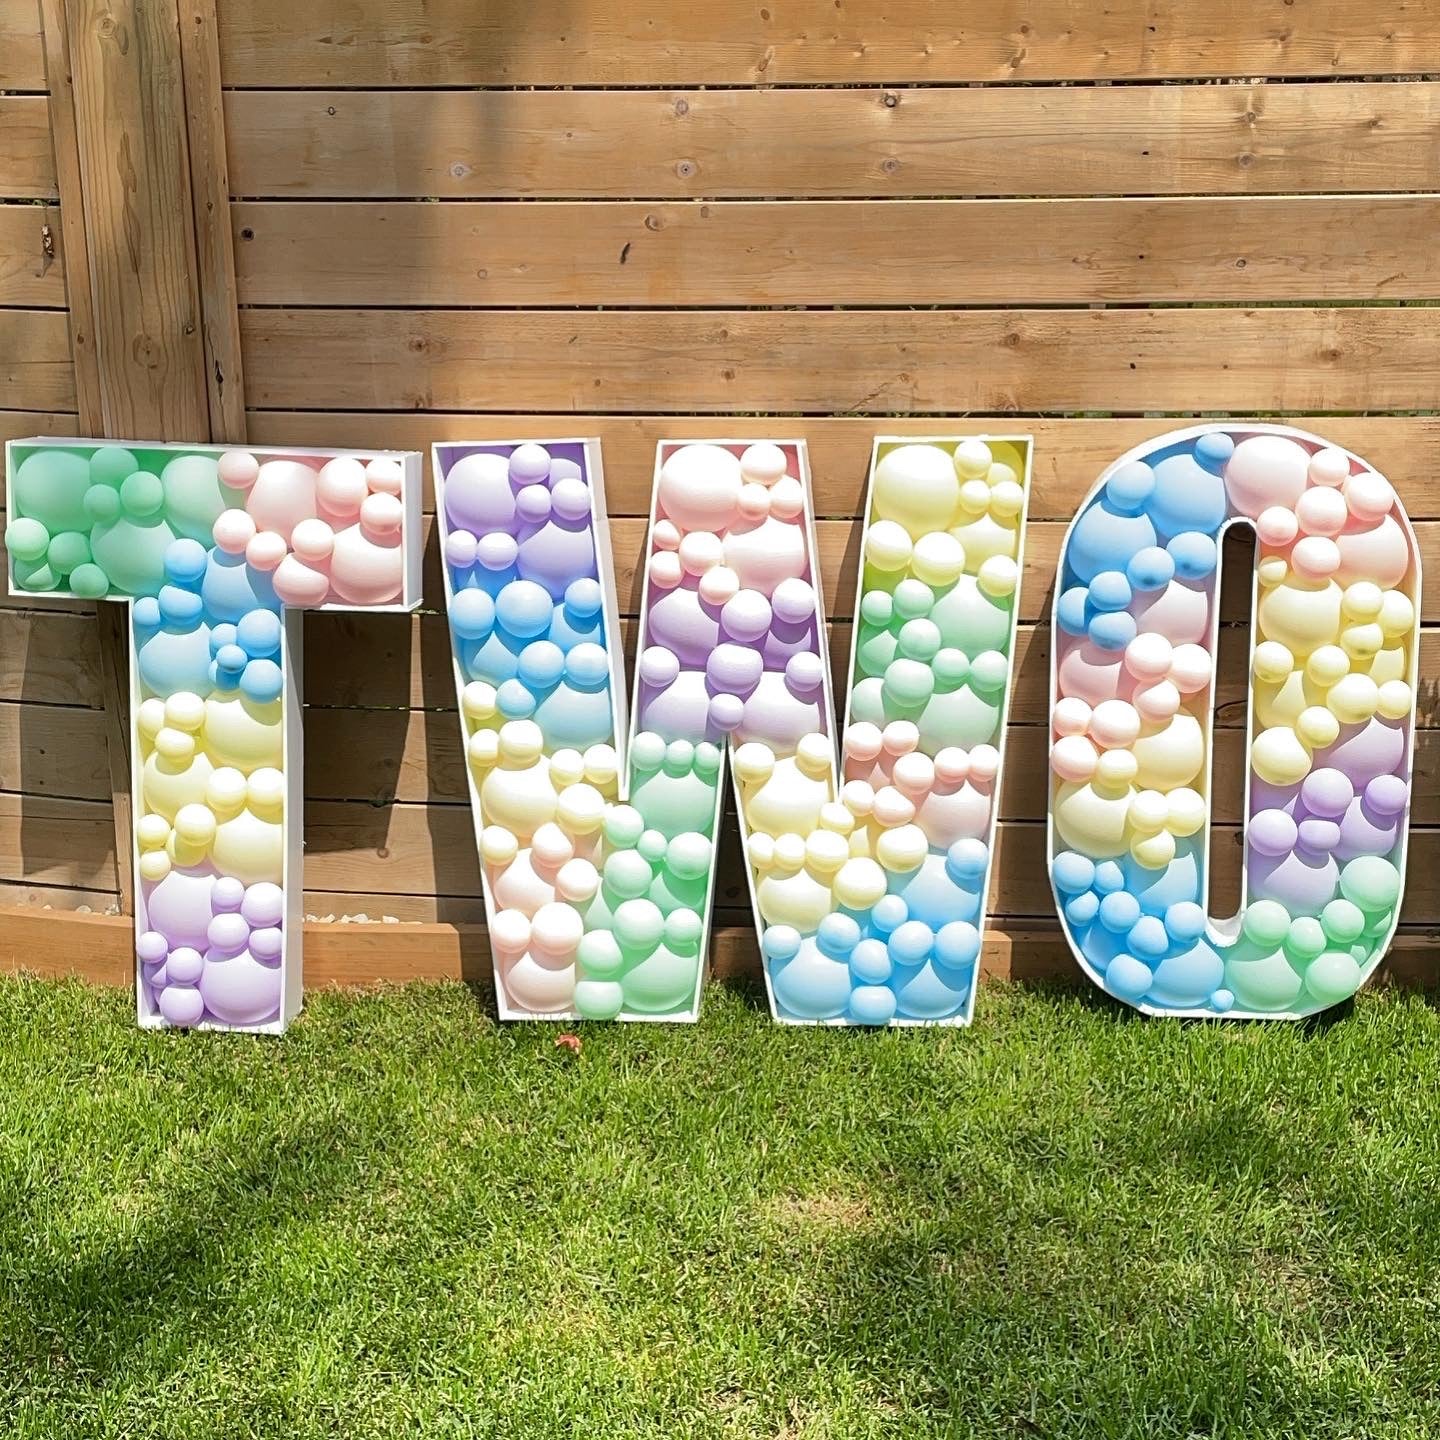 3 FT BALLOON MOSAIC $290 PER NUMBER/LETTER